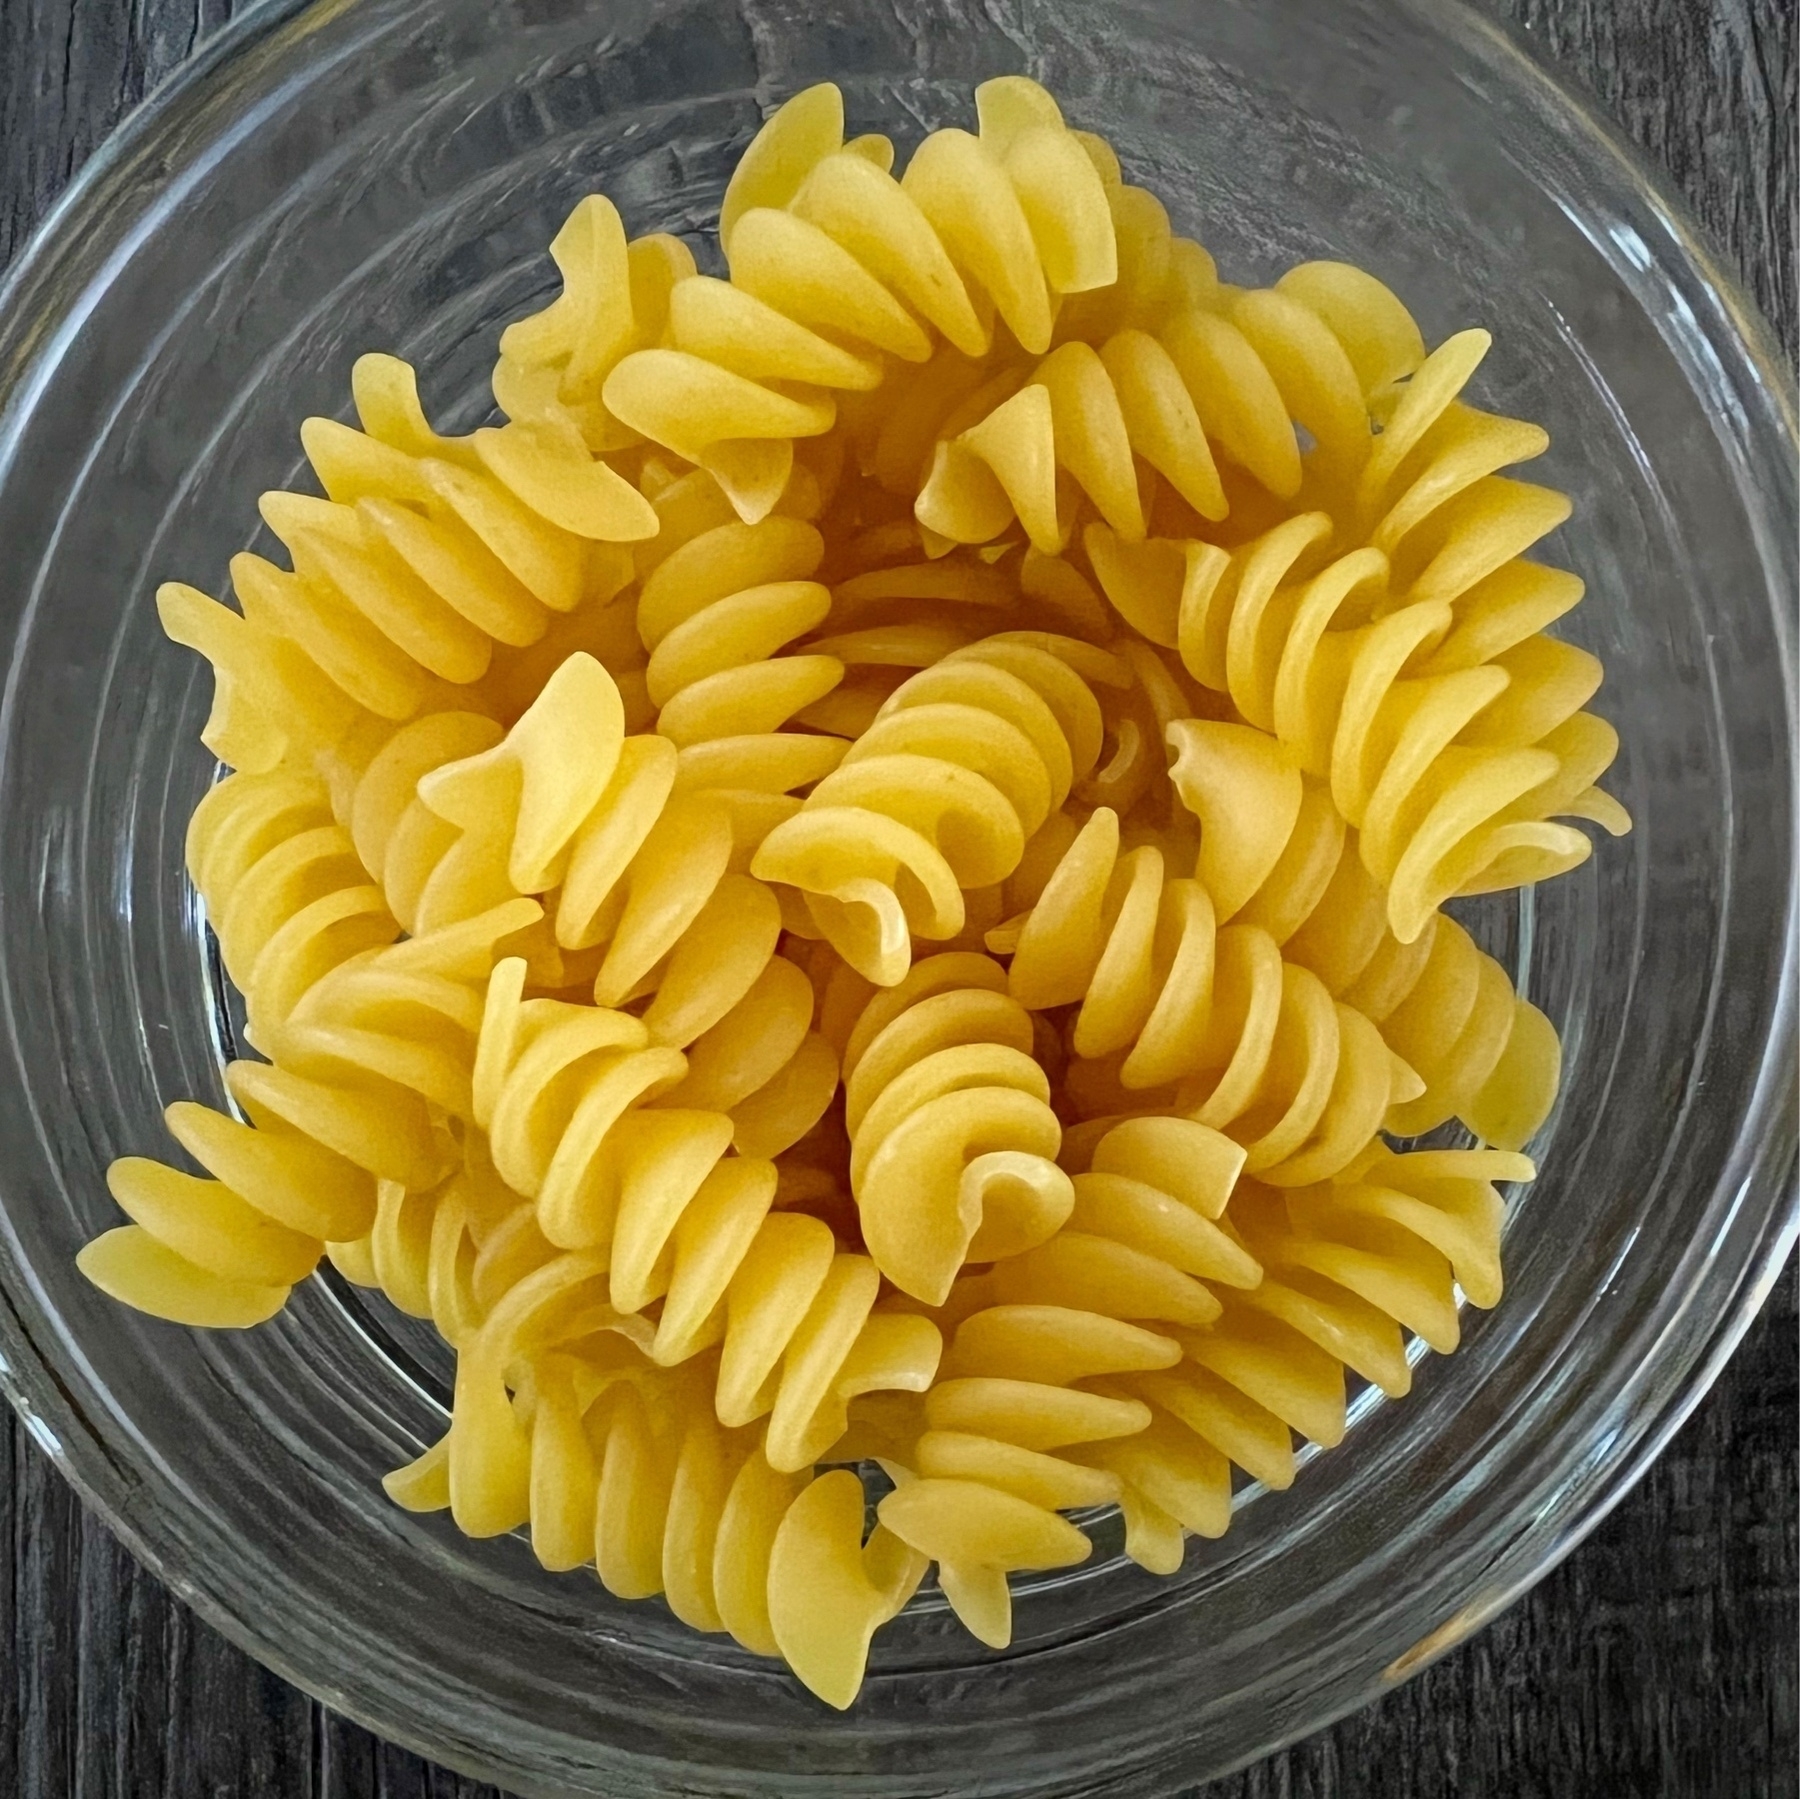 rotini pasta noodles in a bowl